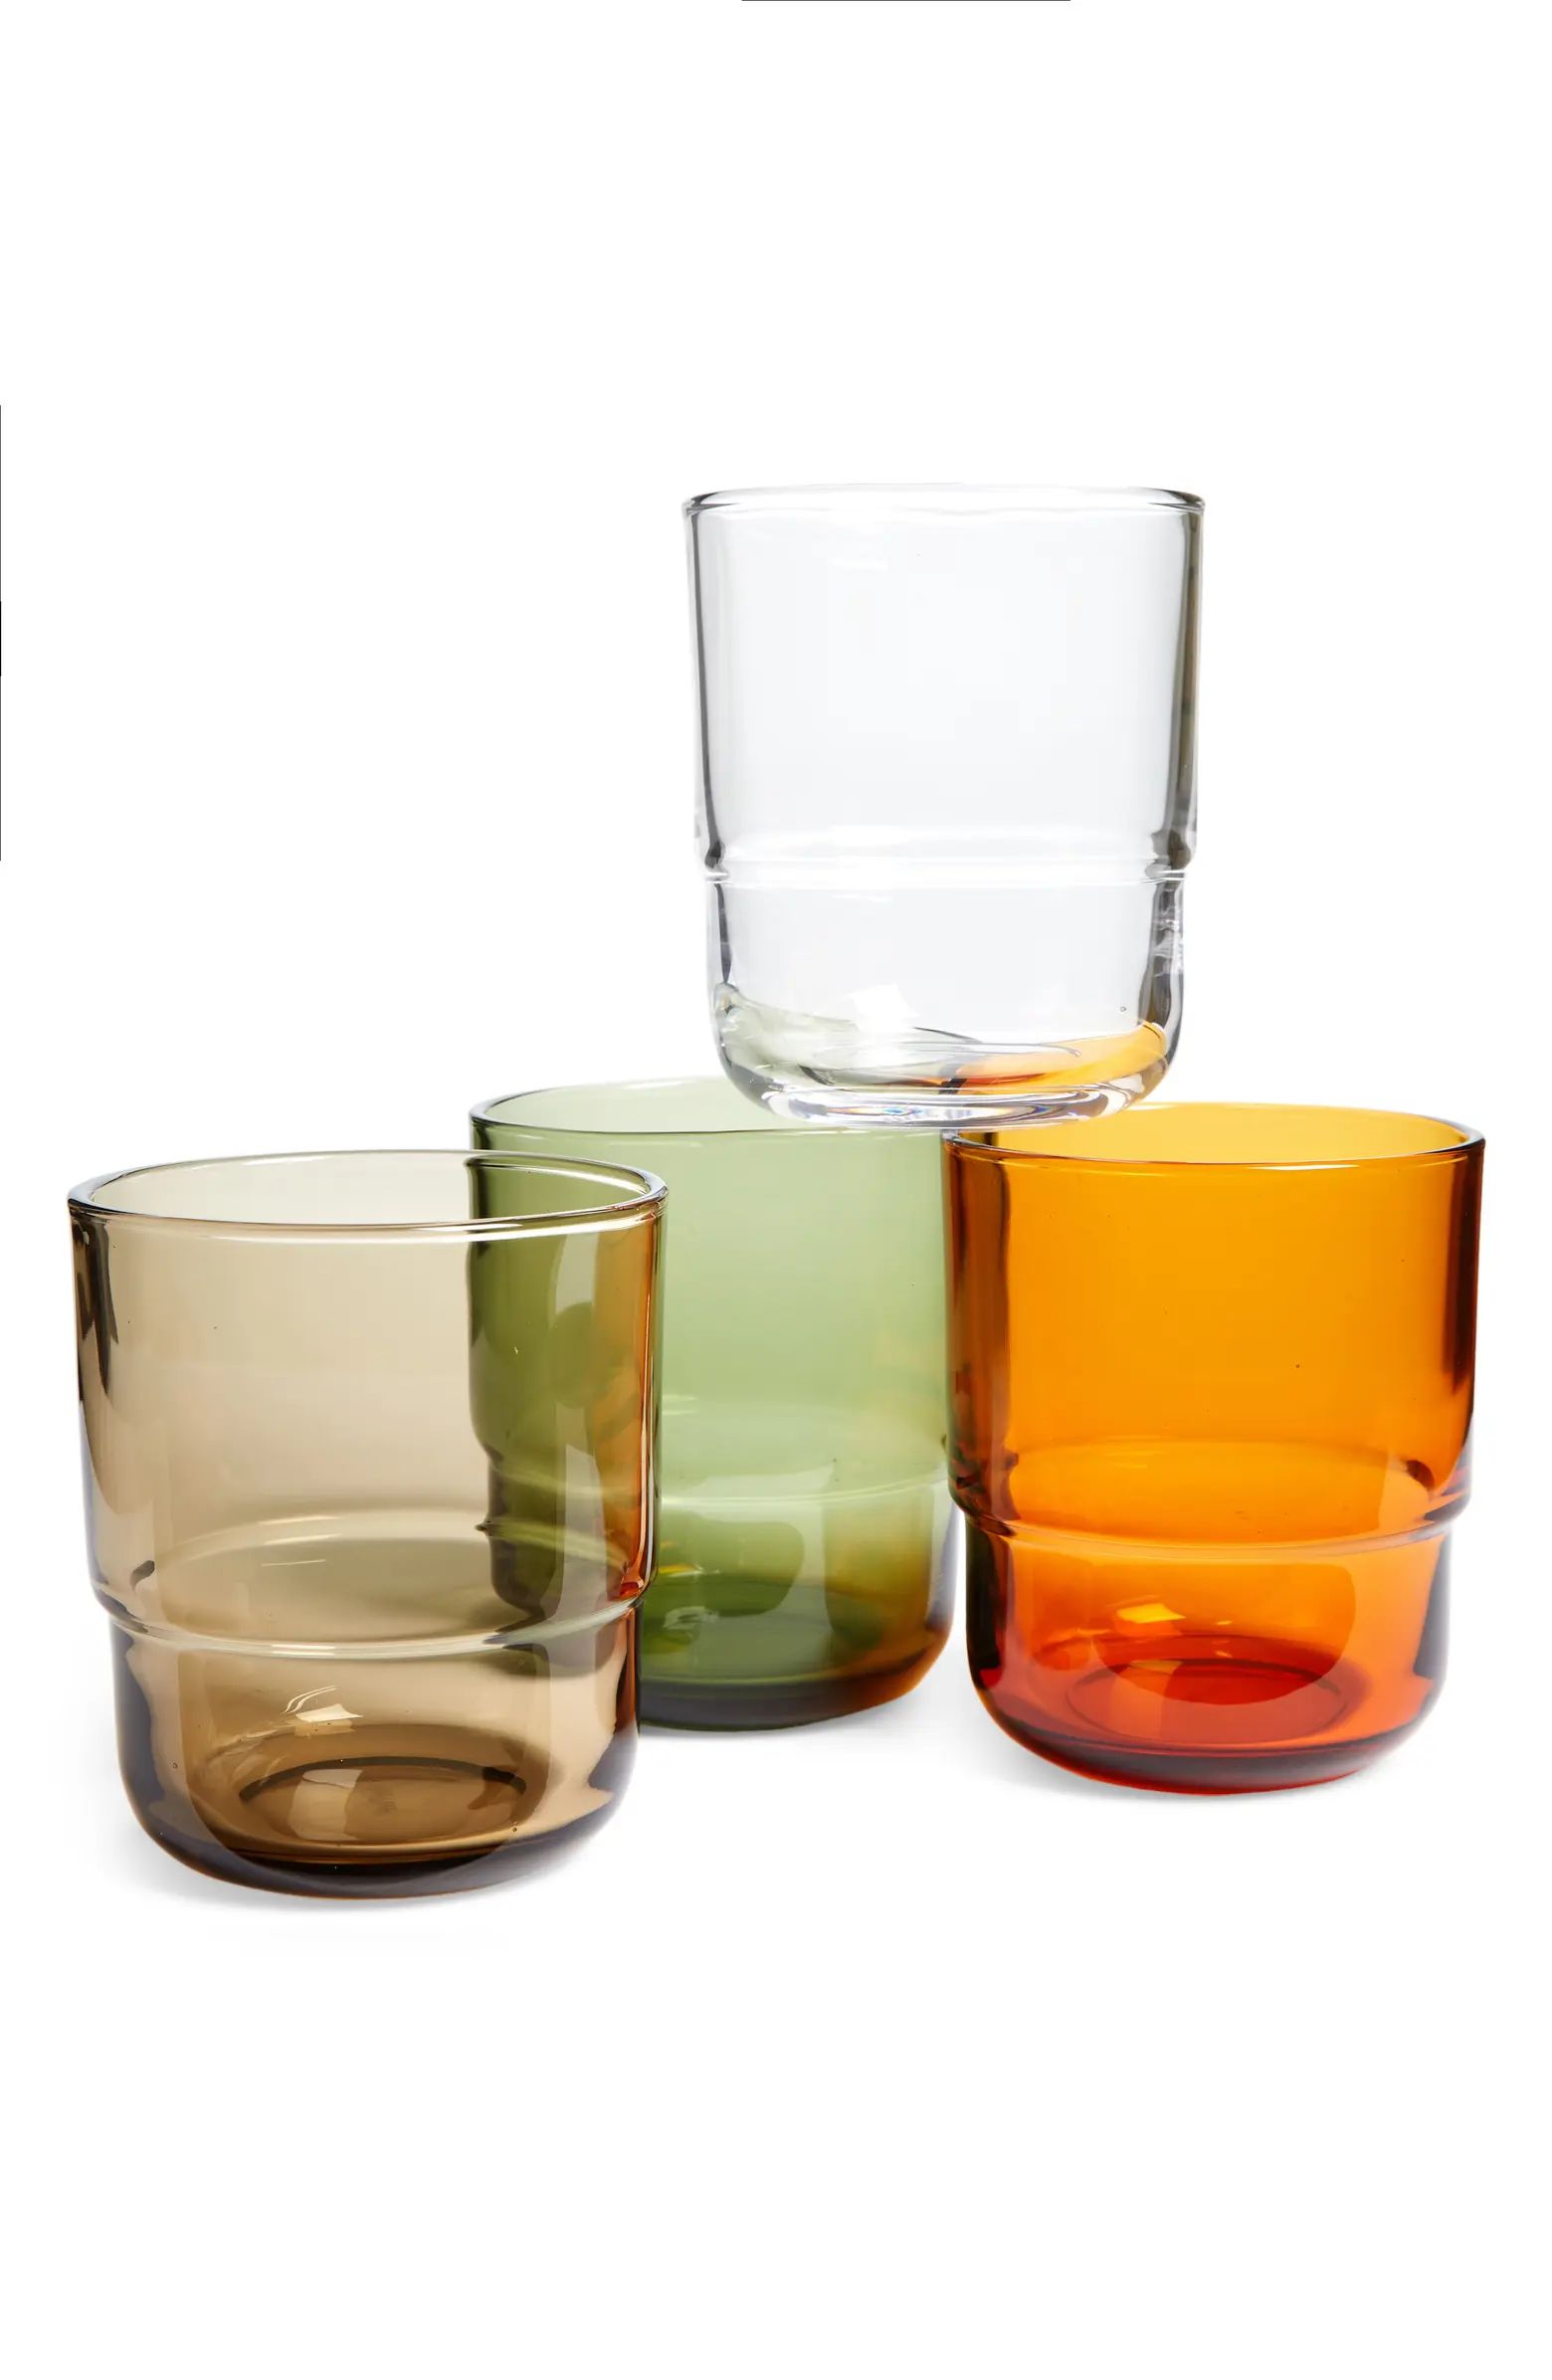 Our Place Set of 4 Tumblers | Nordstrom | Nordstrom